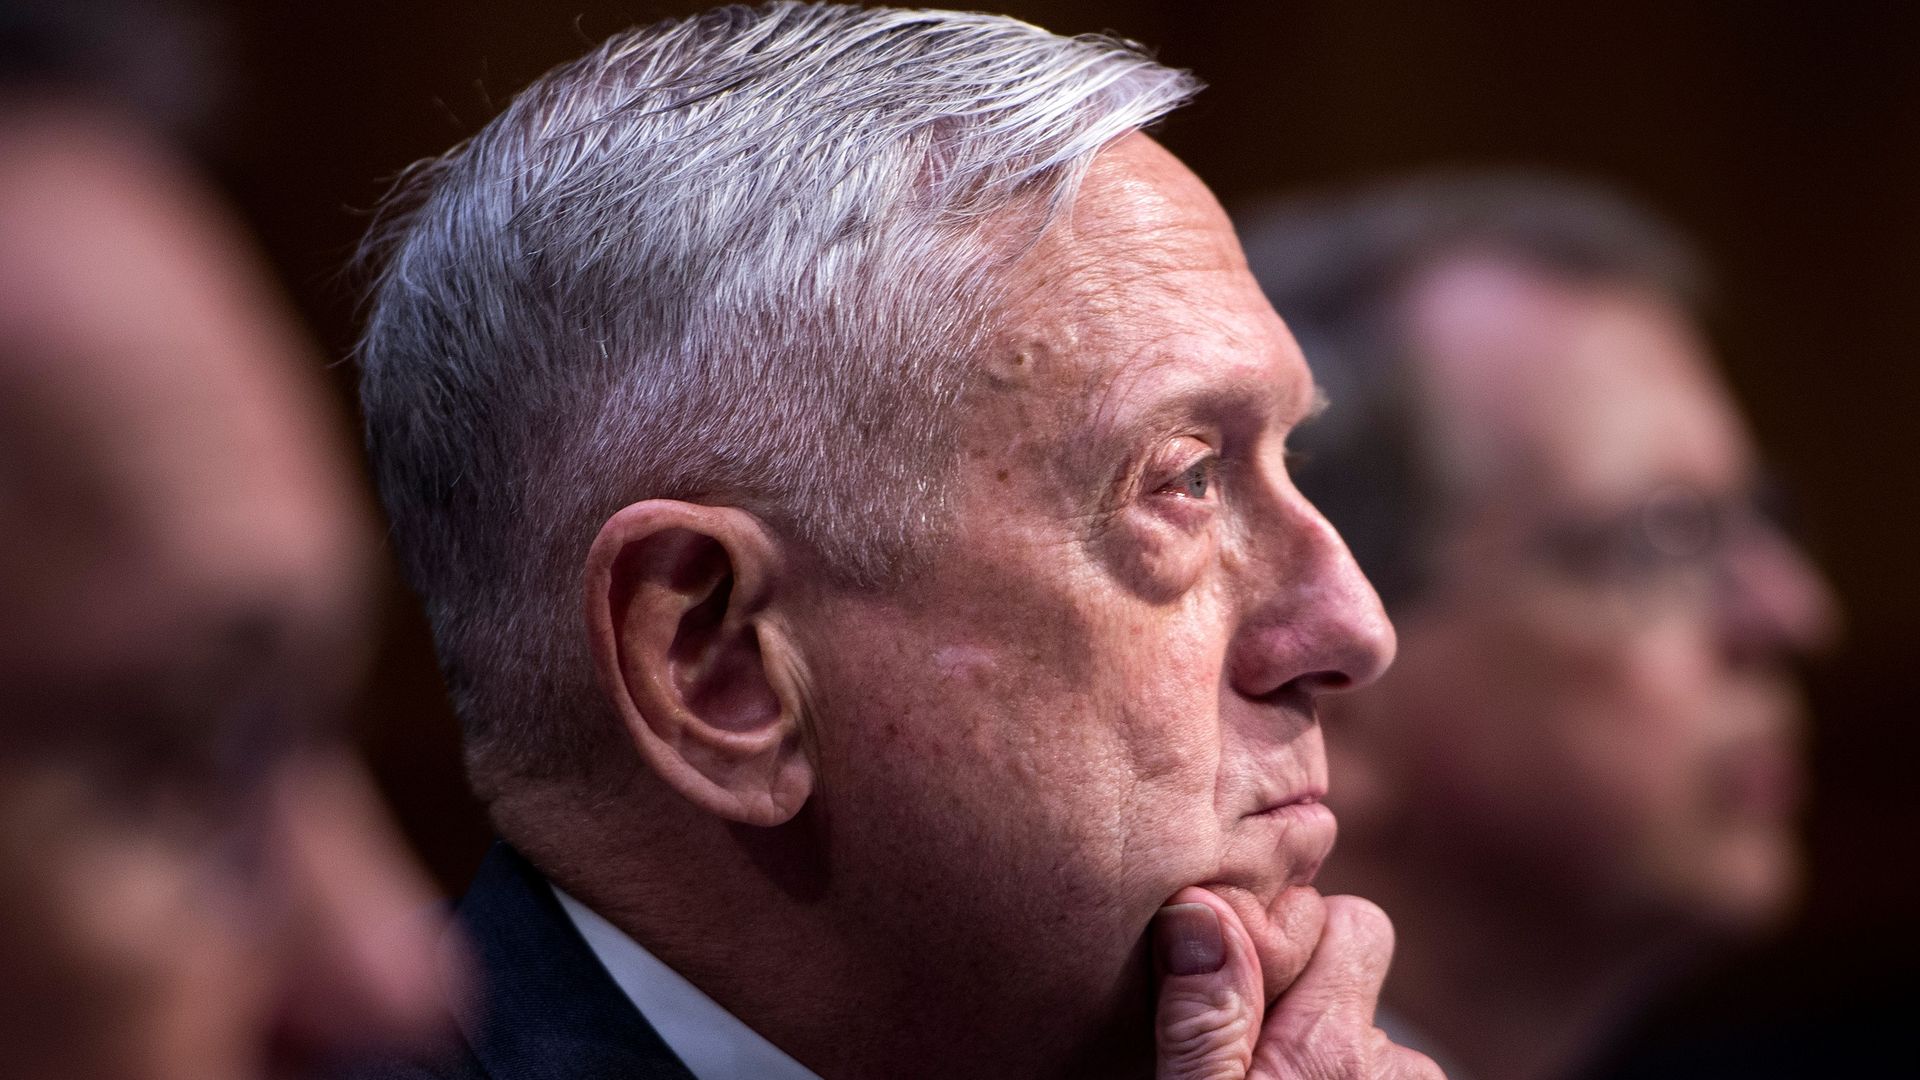 Mattis strokes his chin and looks concerned.